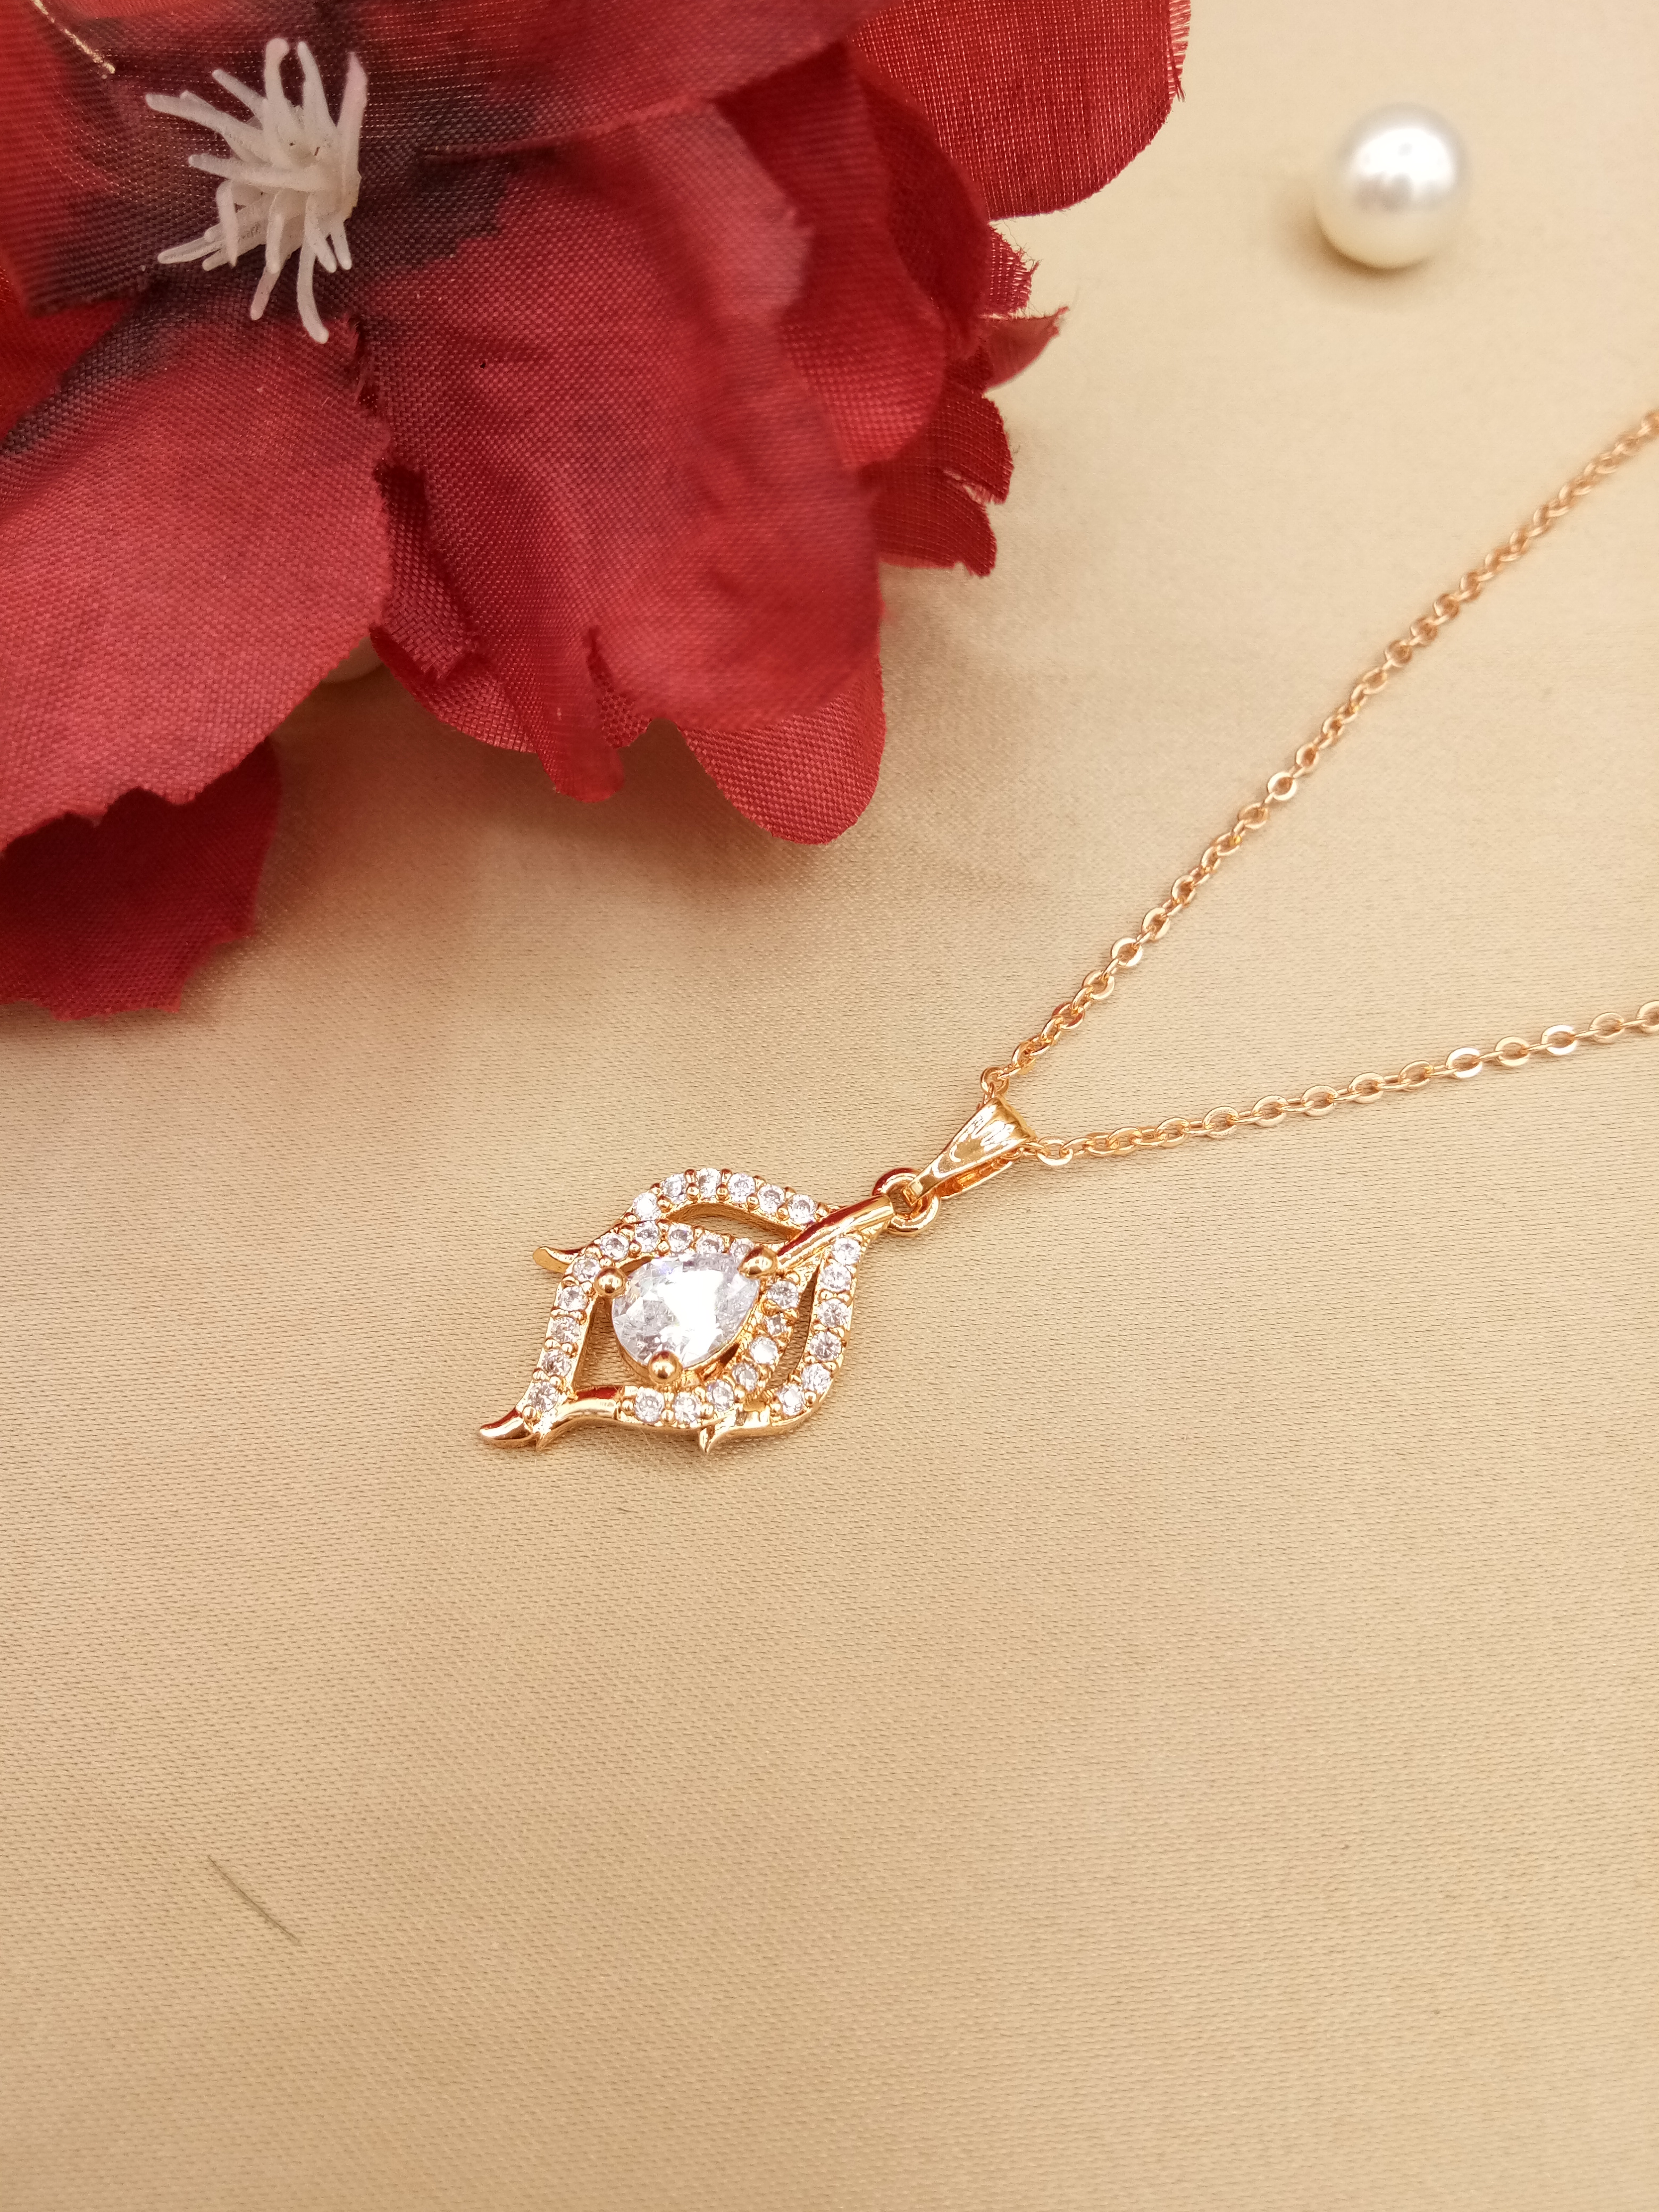 AD ROSE PENDENT - 07195 NX